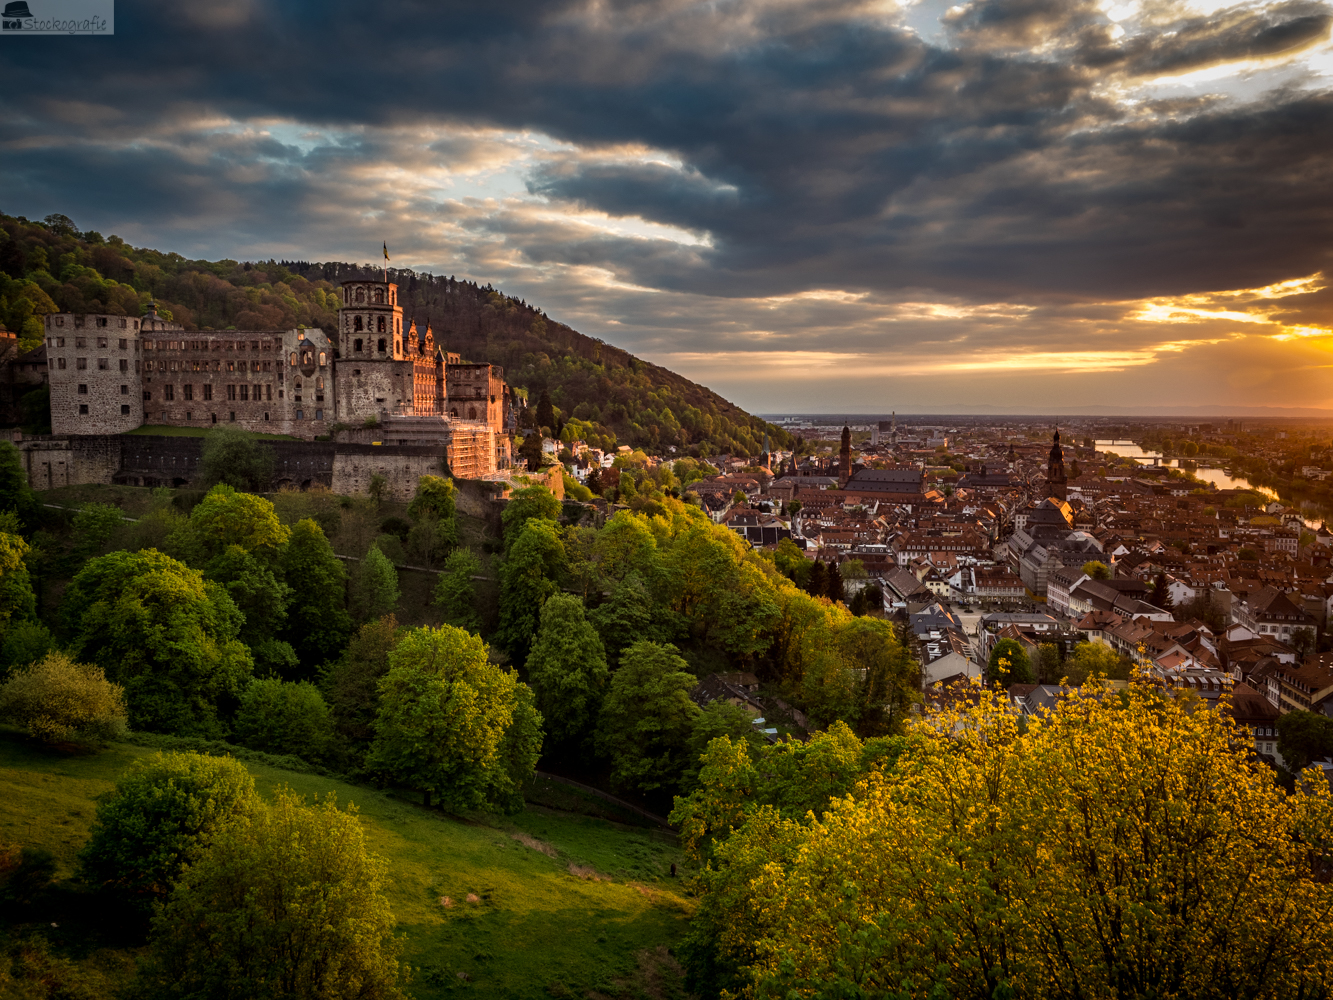 In Heidelberg with the Olympus OM-D E-M1 and the M-Zuiko 12-40mm 2.8 Pro